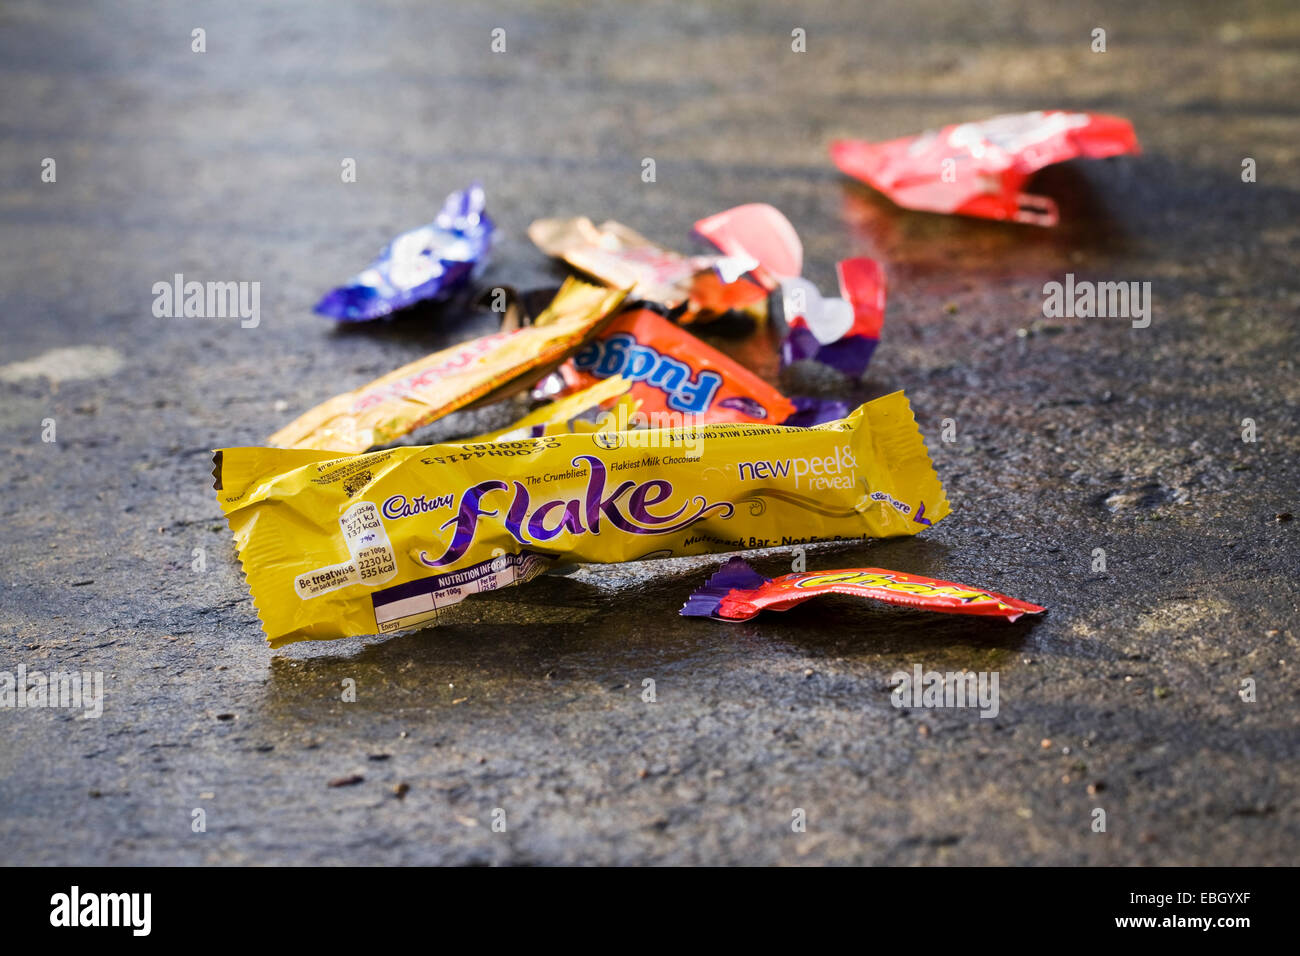 Empty sweet wrappers littering the pathway. Stock Photo